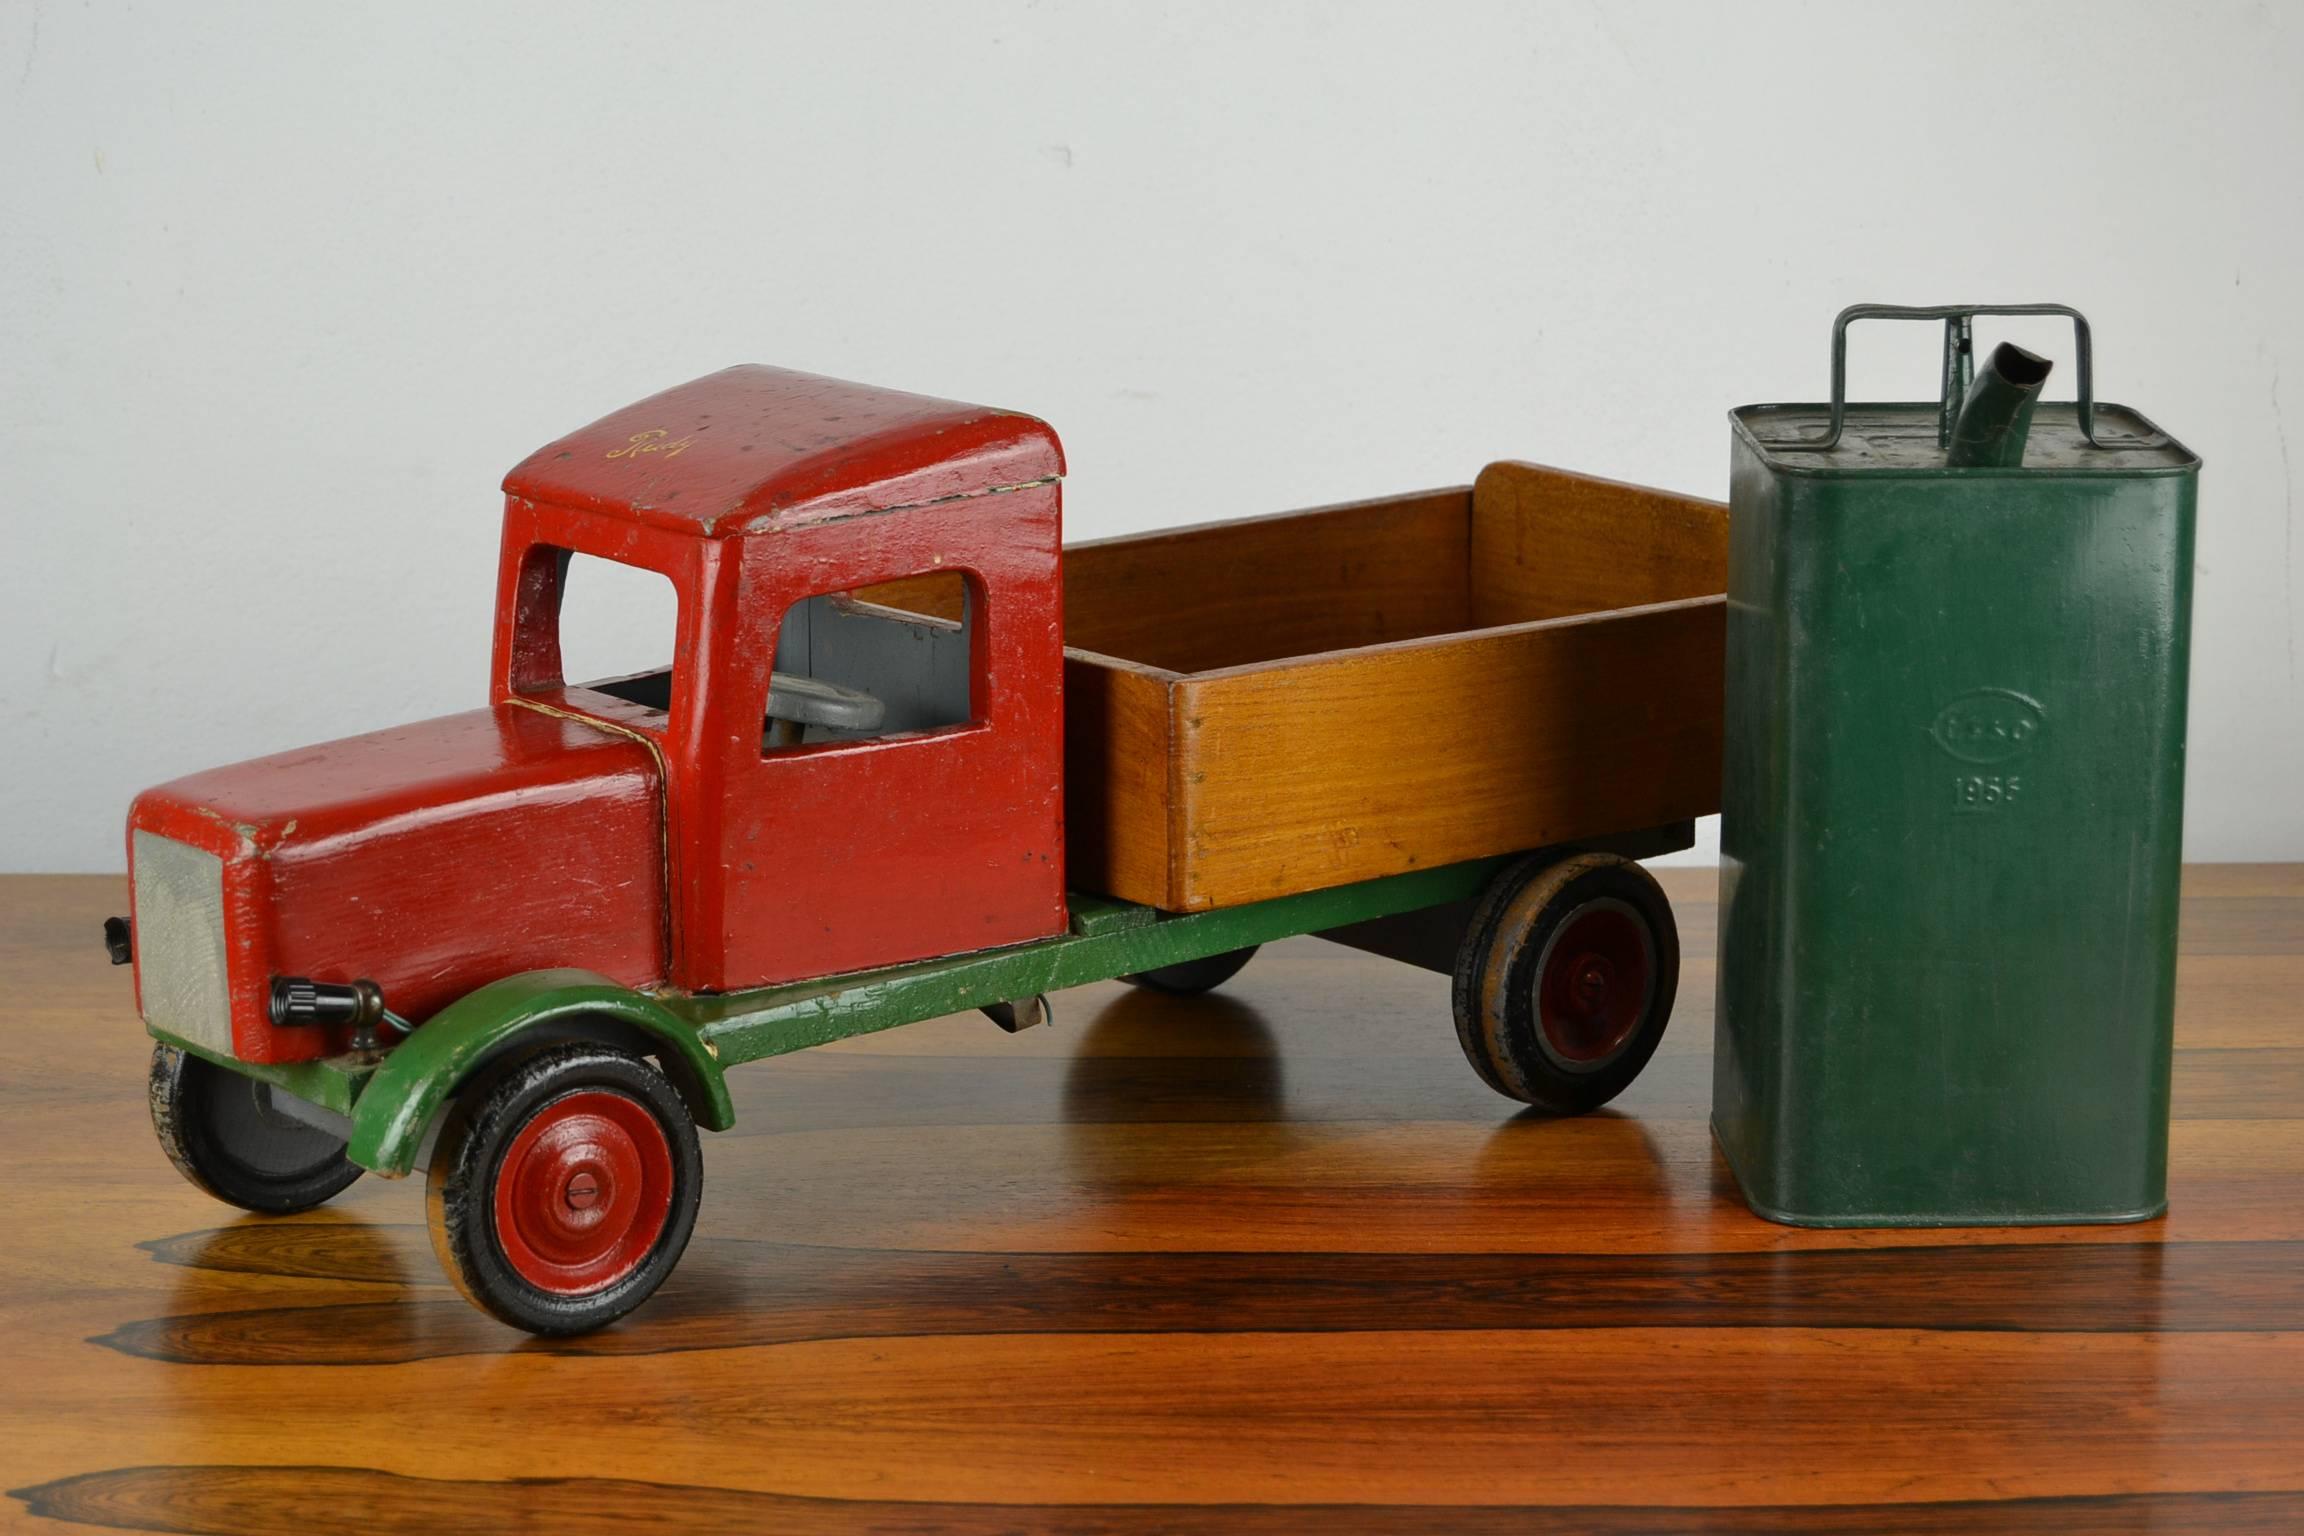 Measures: Large (63cm / 24.80 inch length) vintage painted wood toy dump truck with wooden tires, bakelite headlights and switch at the bottom.
One-of-a-kind Folk Art toy truck with beautiful patina, original age wear.
Children's toys, toys for